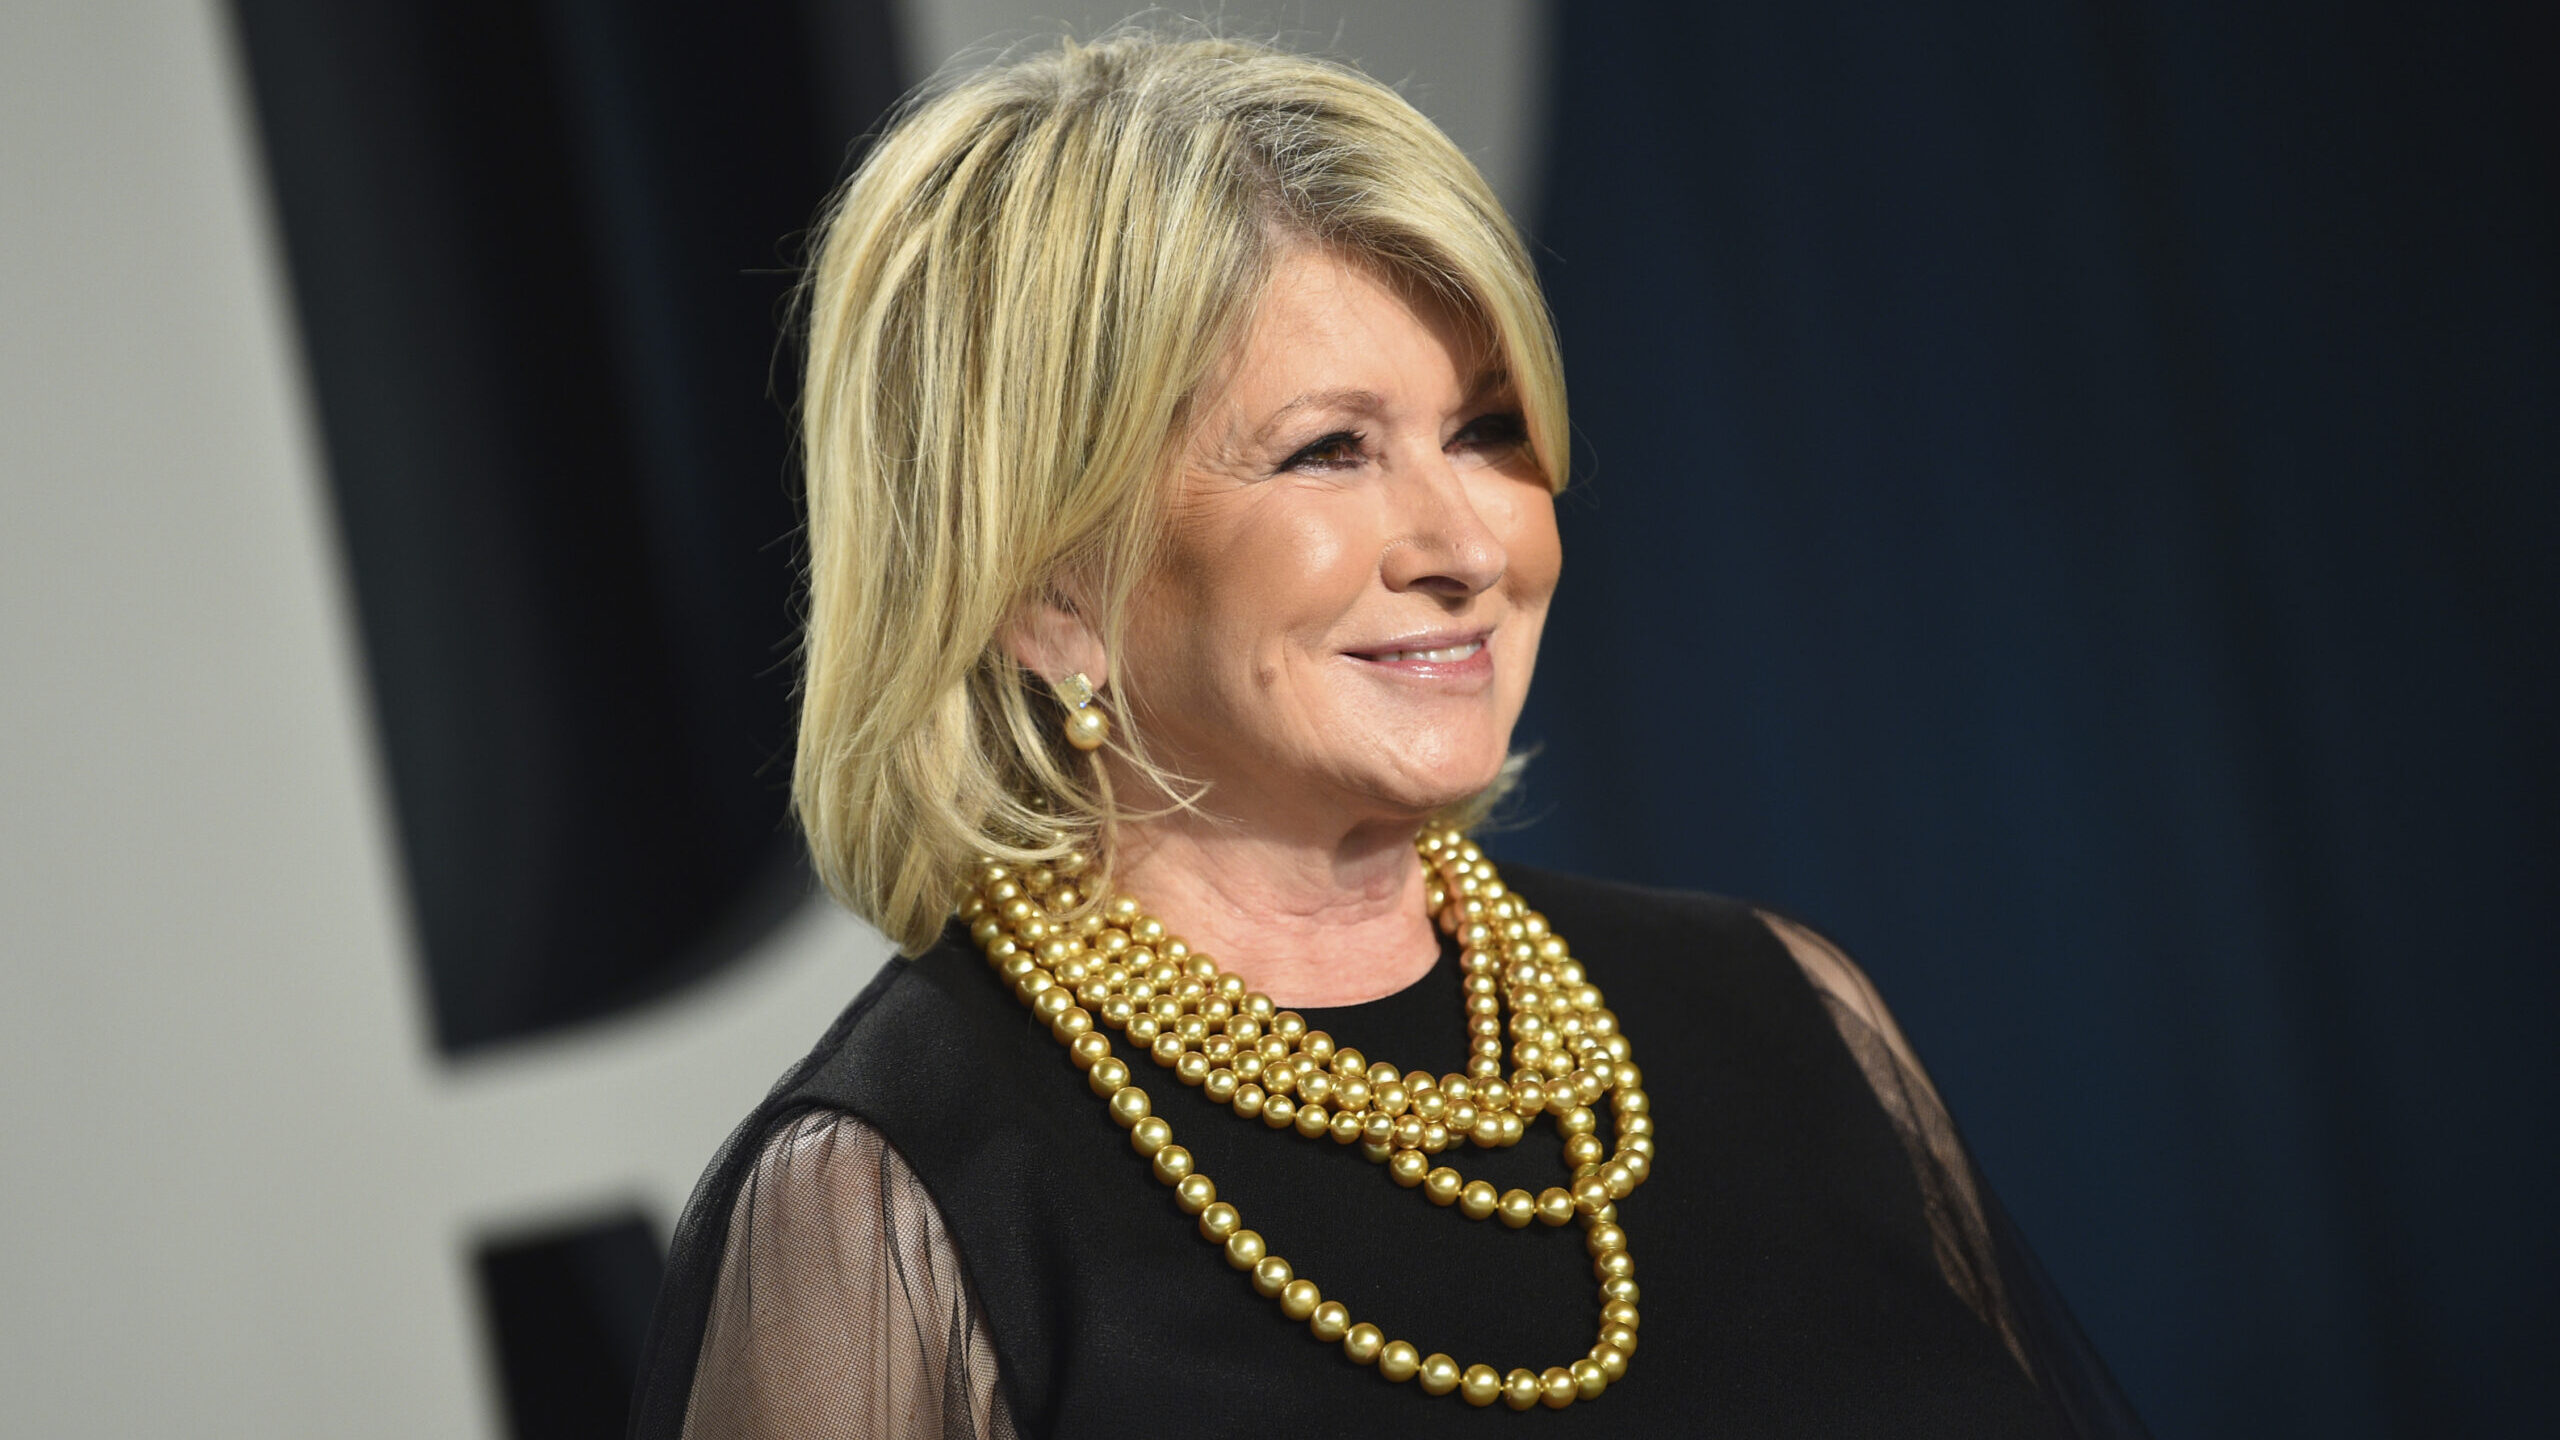 At 81, Martha Stewart isn't slowing down and some might say she's heating up. Stewart has been chos...